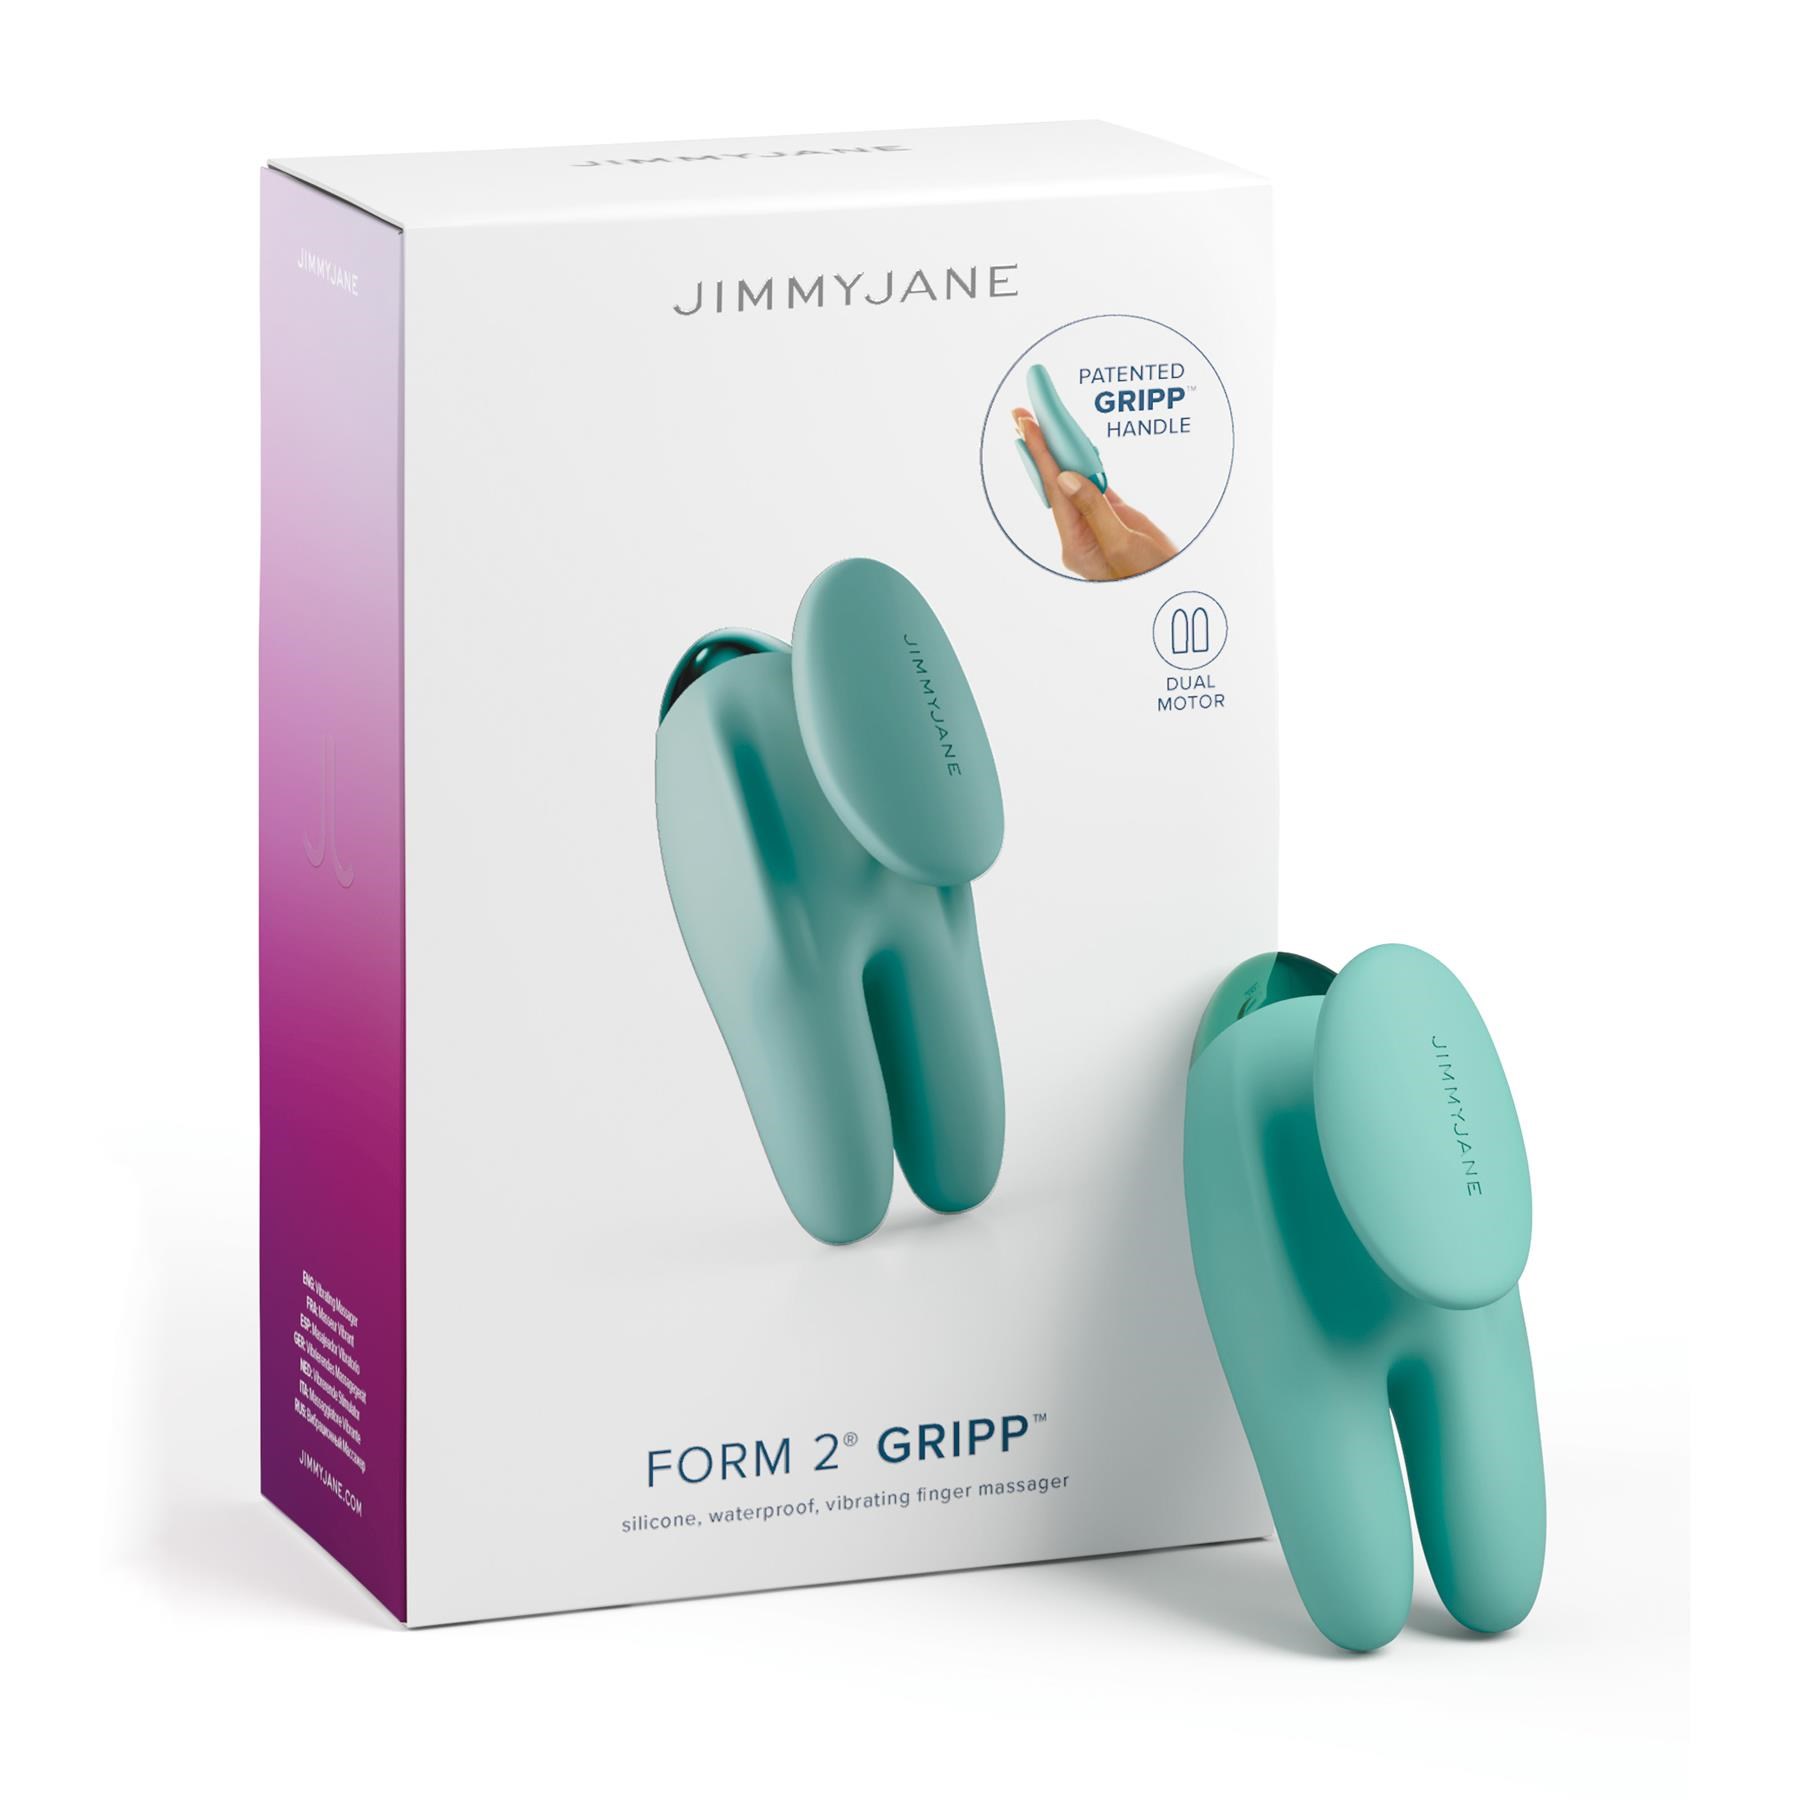 Jimmy Jane Form 2 Gripp Finger Vibrator - Product and Packaging